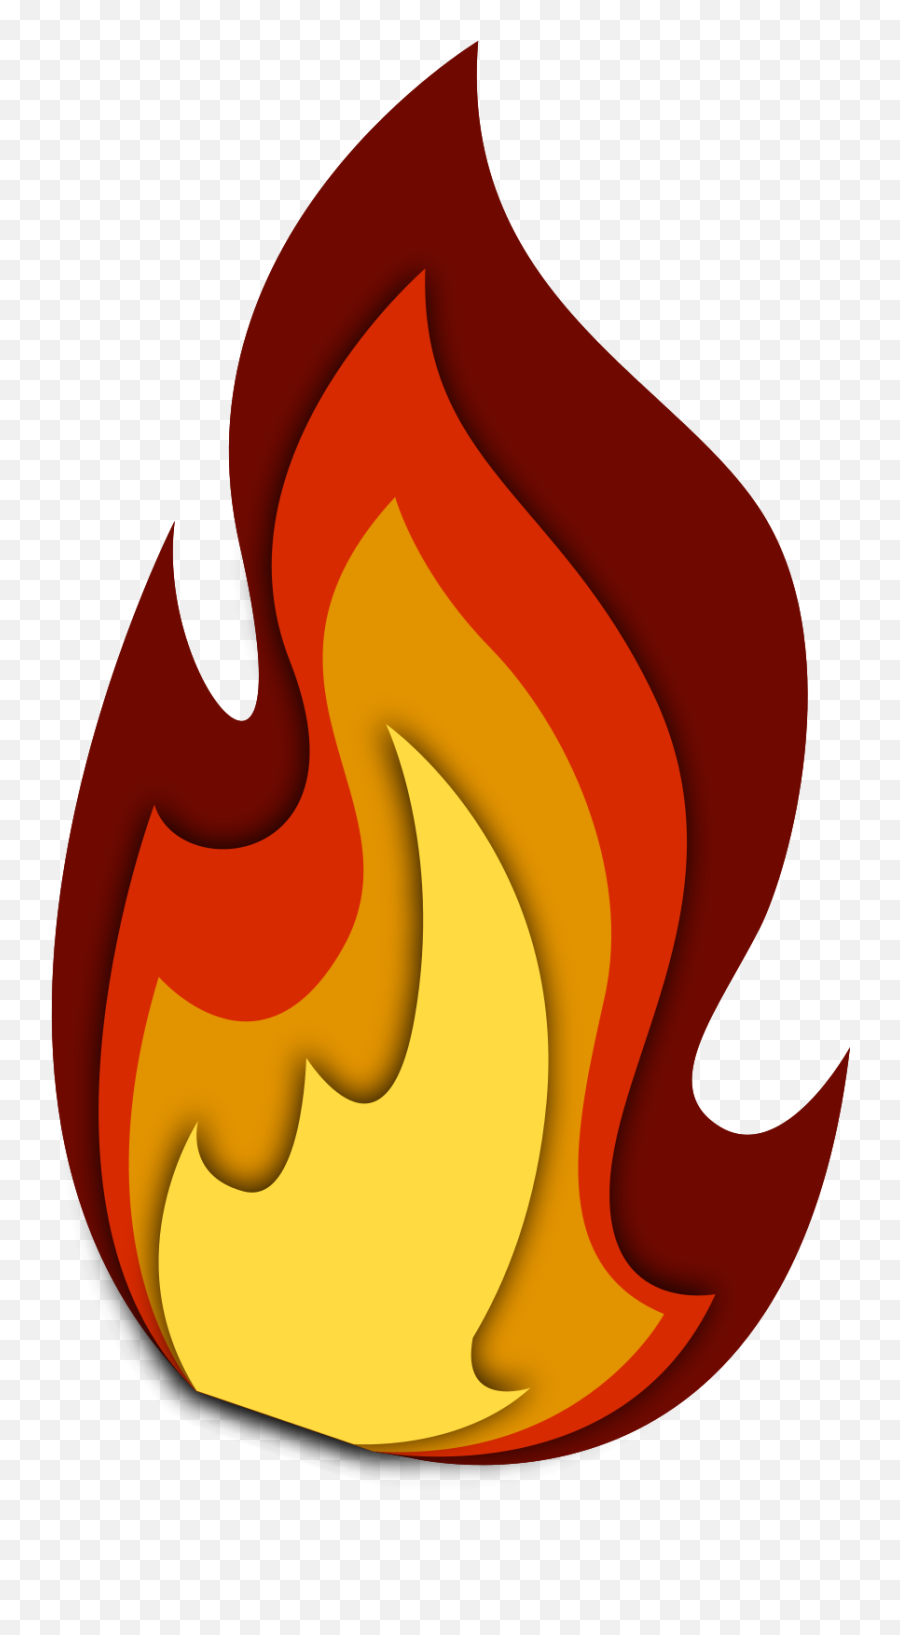 Free Fire 1188564 Png With Transparent Background - Vertical Emoji,Fire And Marshmallow Emoticons